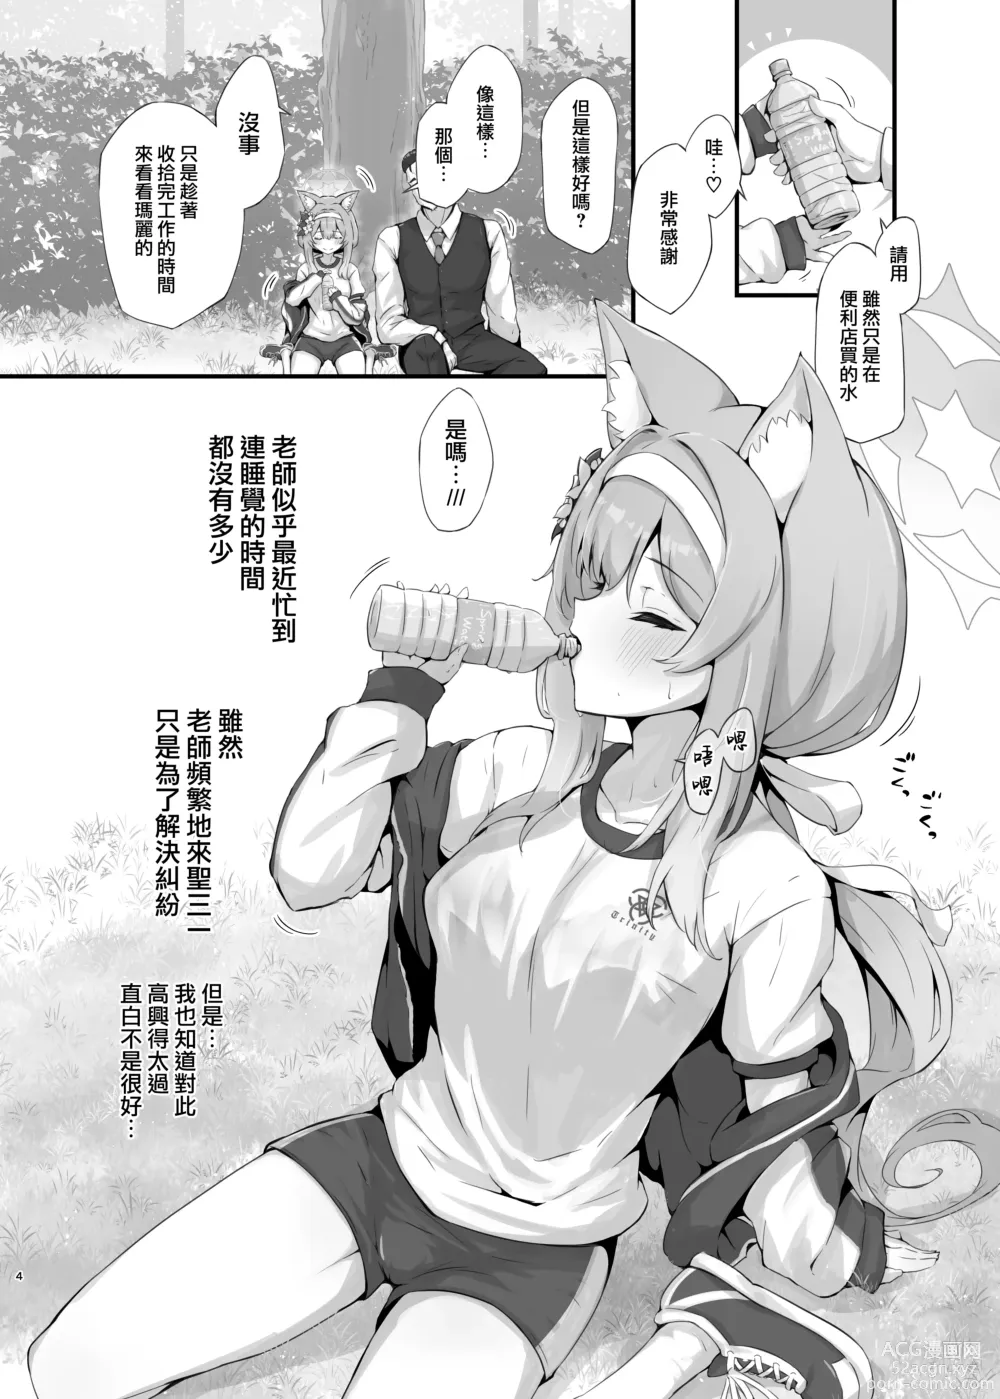 Page 5 of doujinshi 吸瑪麗